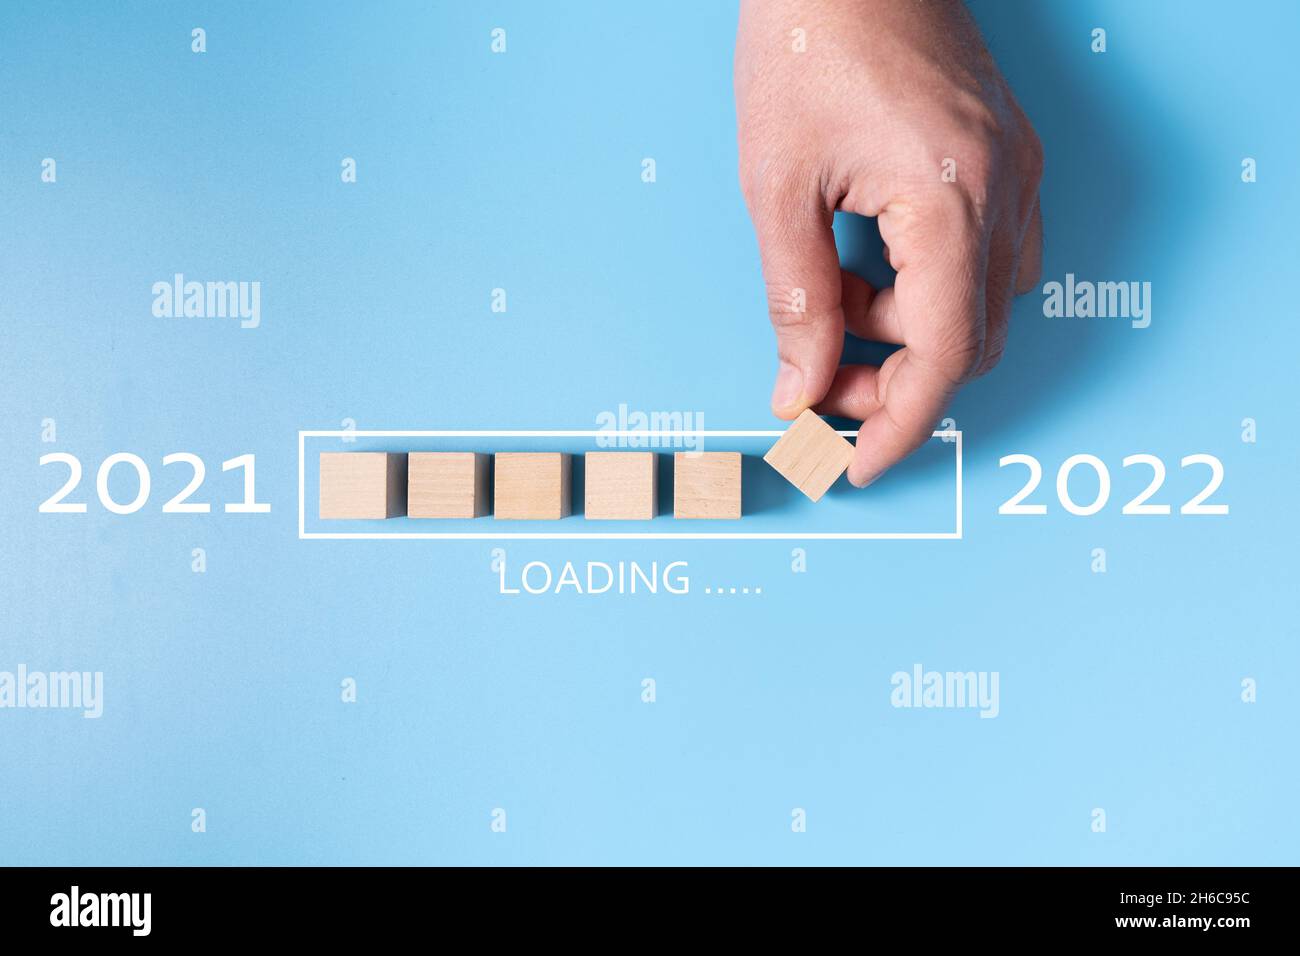 New year 2022 counting down Stock Photo